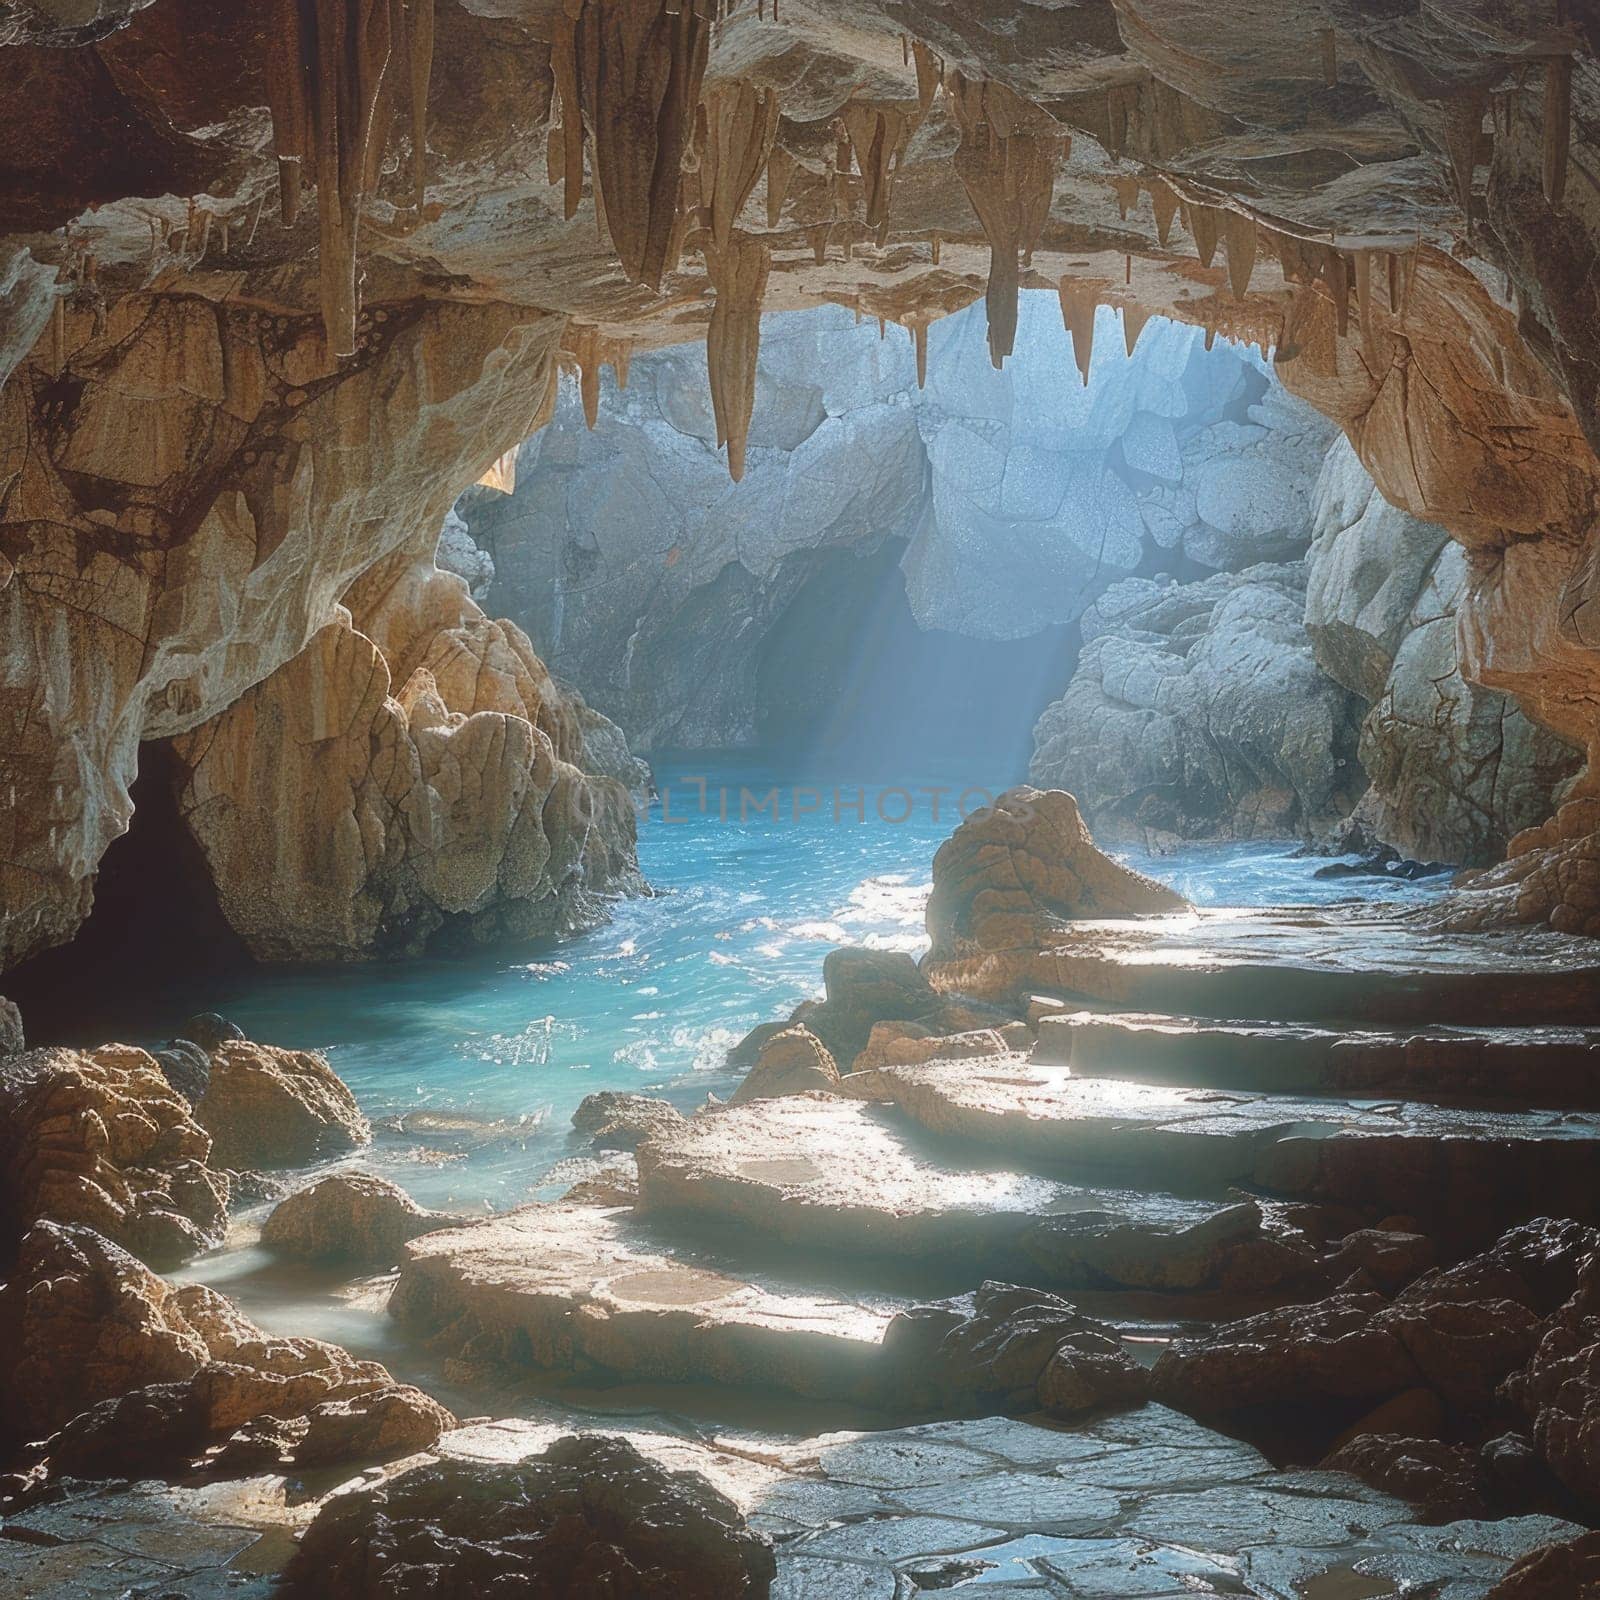 Large Cave With Water Pool by but_photo